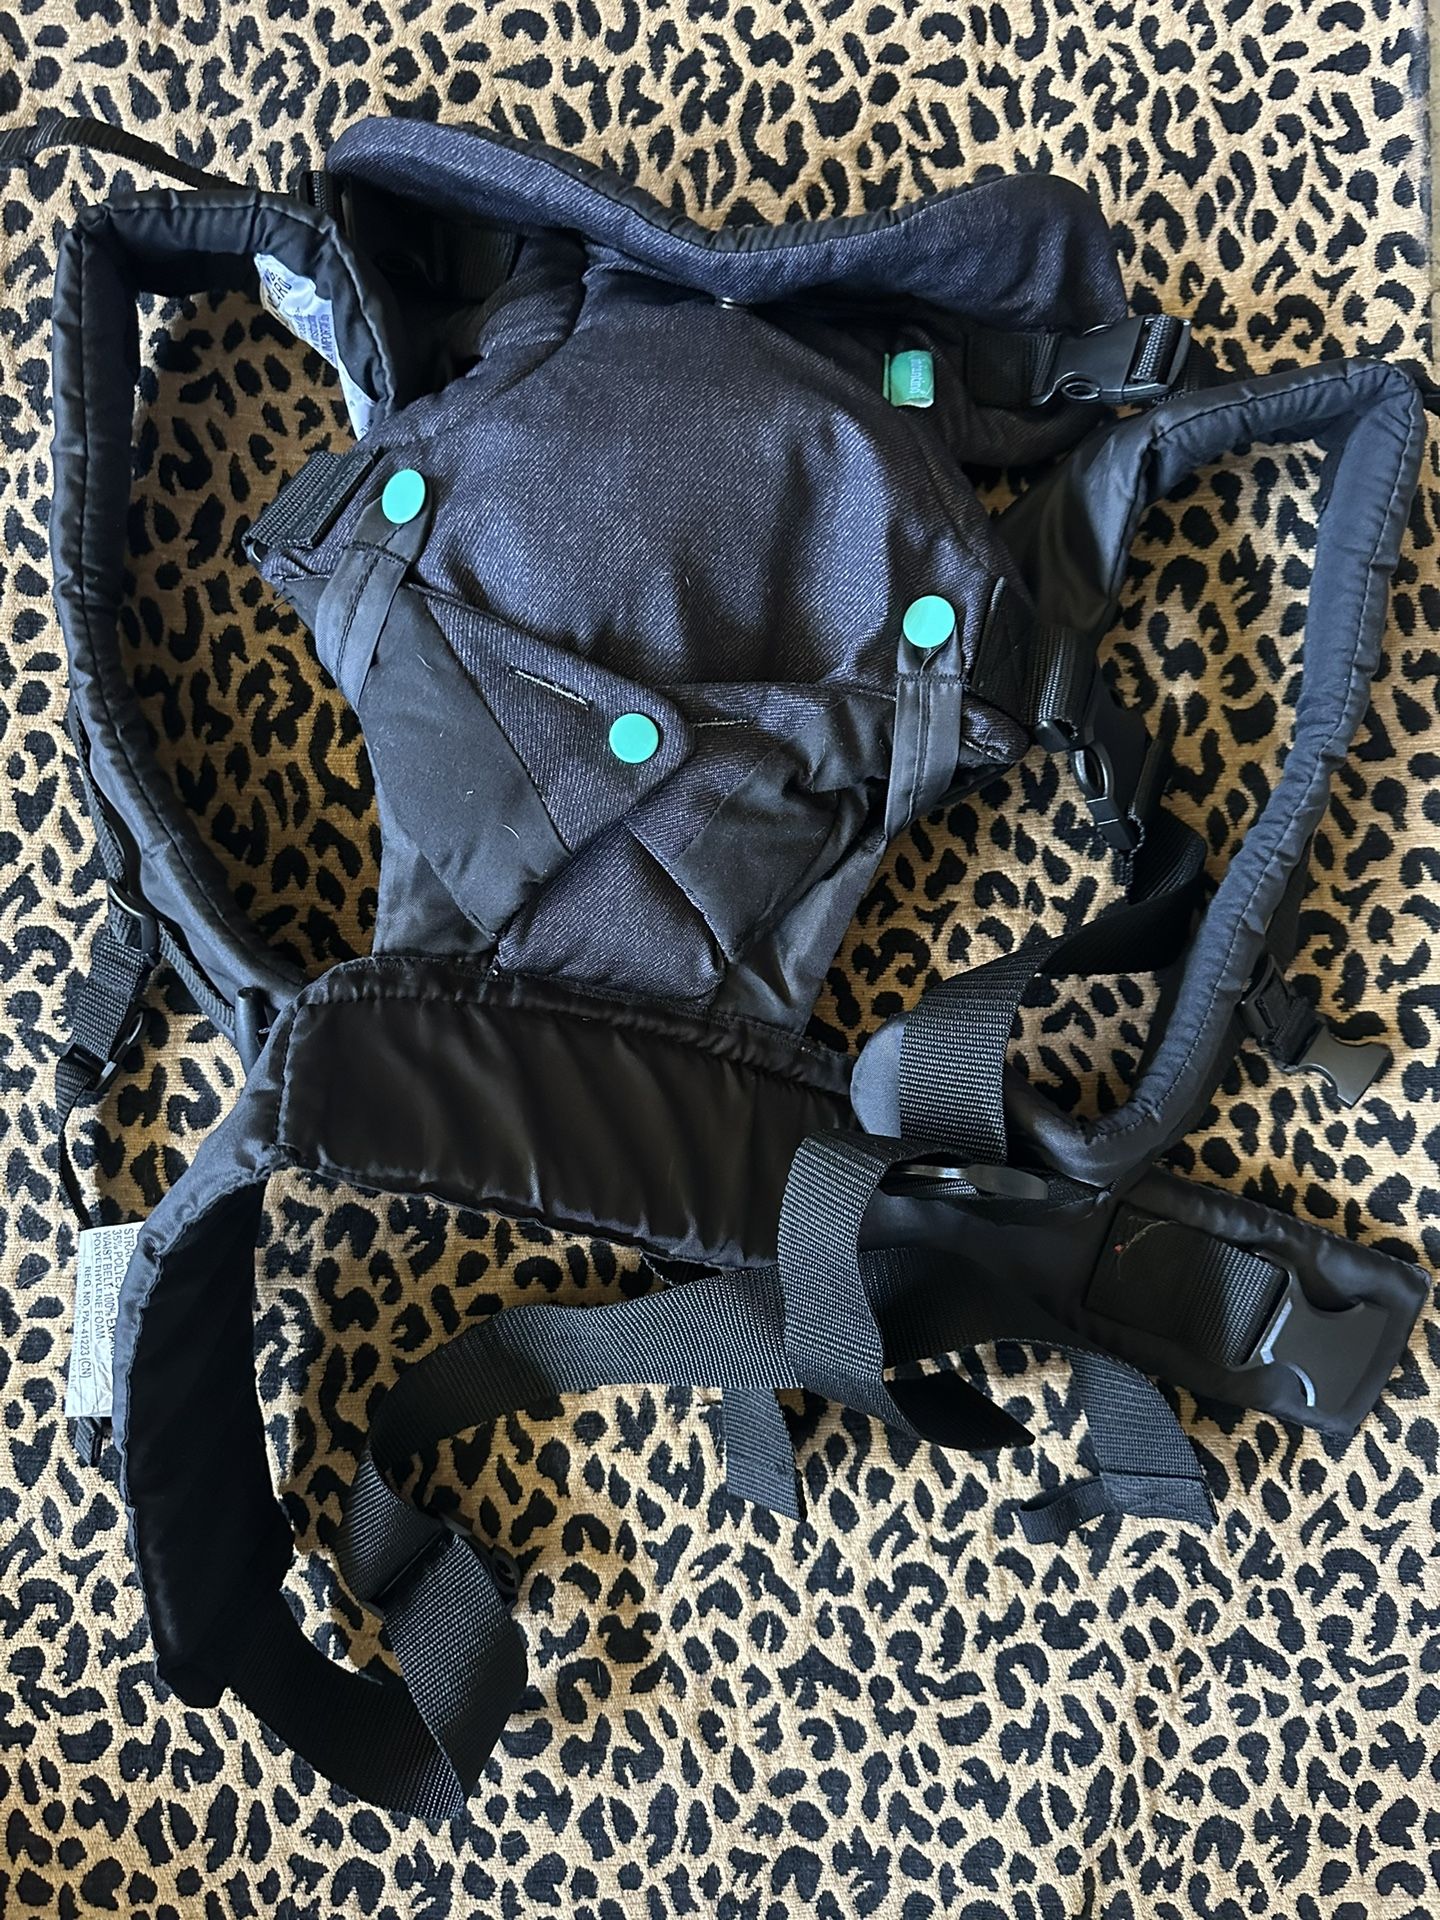 Infantino Flip 4-In-1 Convertible Baby Carrier - Black